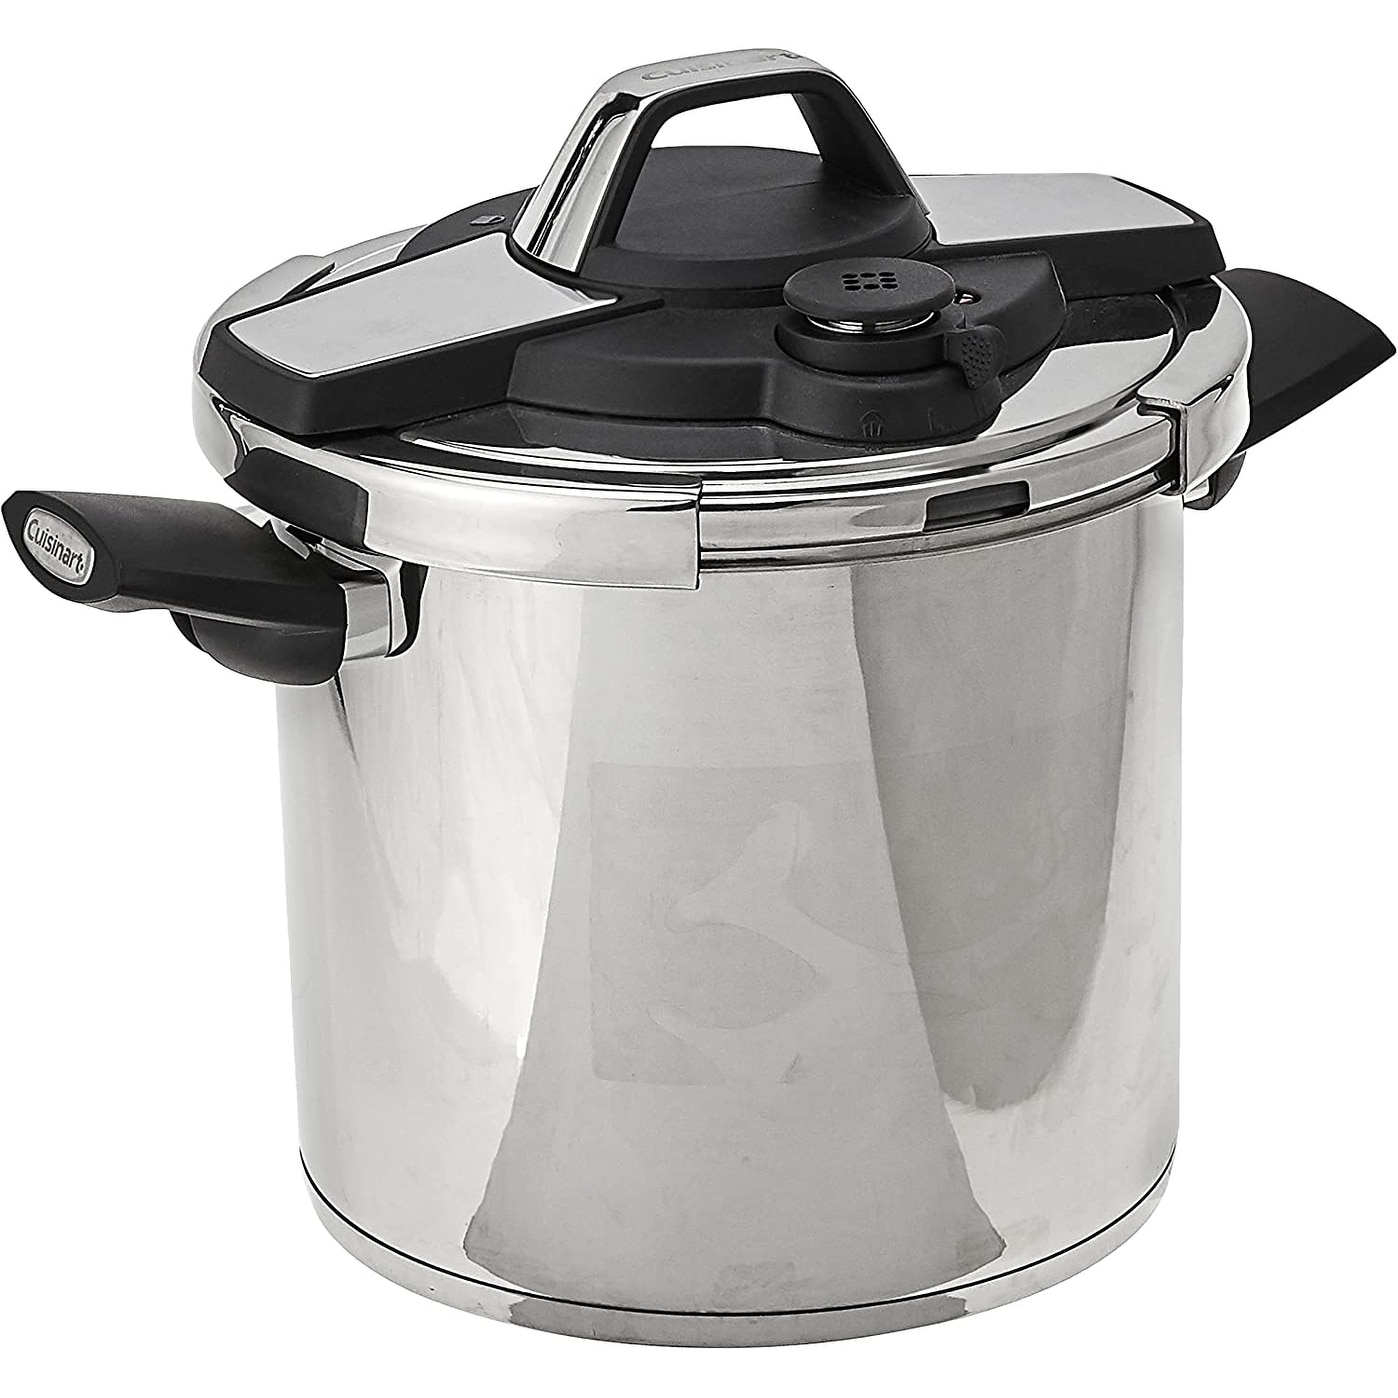 https://ak1.ostkcdn.com/images/products/is/images/direct/ea452dc58da1c48ee33e32c2dce652d7d816bc1e/Cuisinart-CPC22-8-8-Quart-Pressure-Cooker.jpg